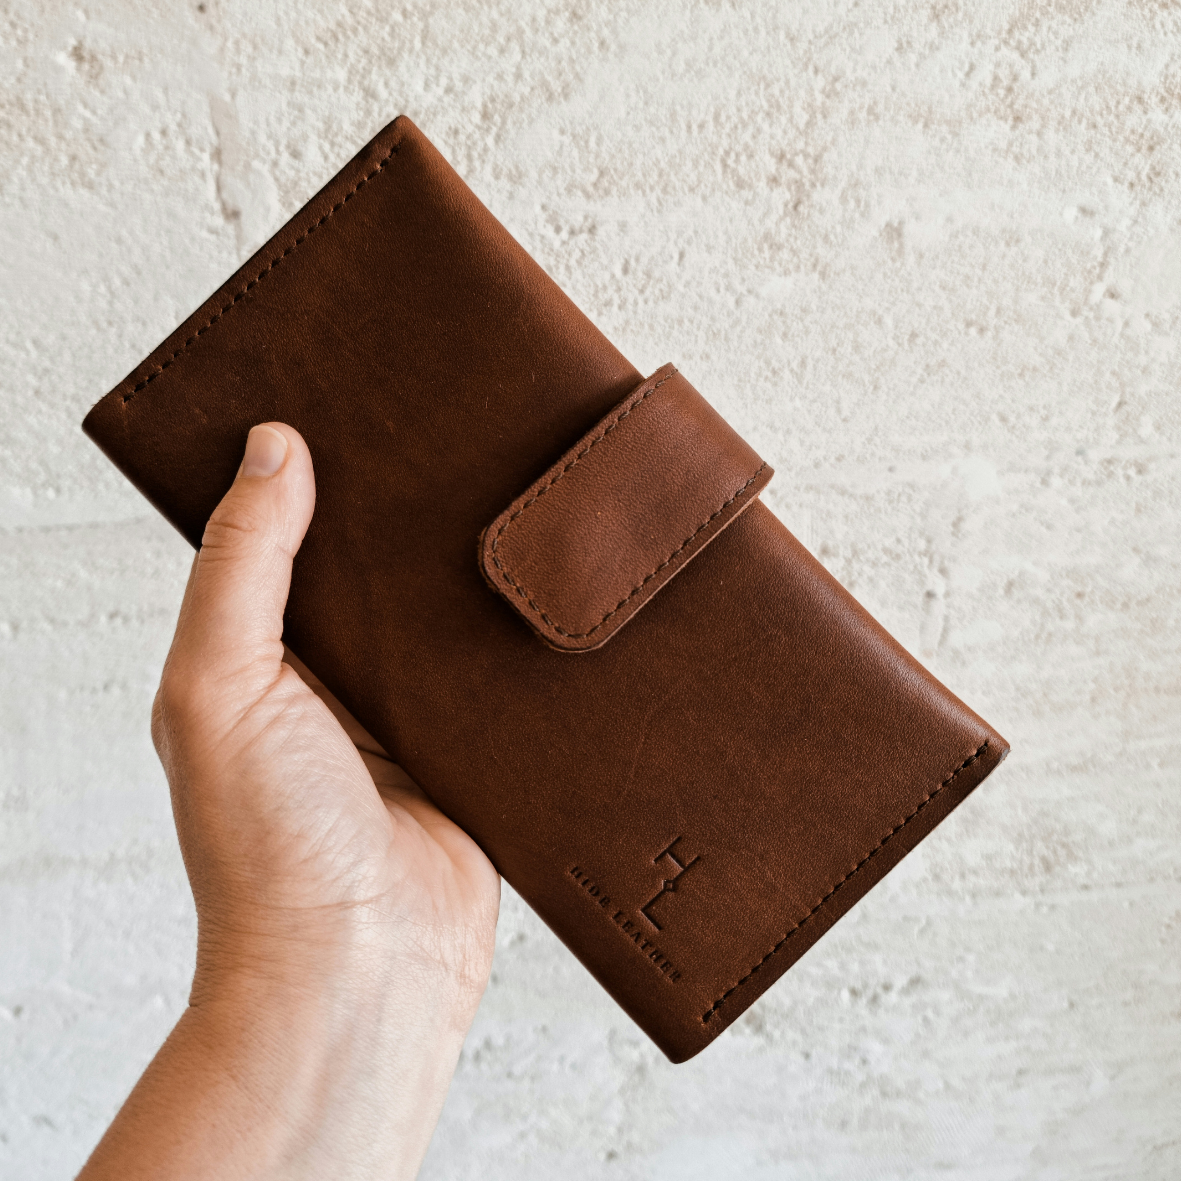 The Chocolate Wallet